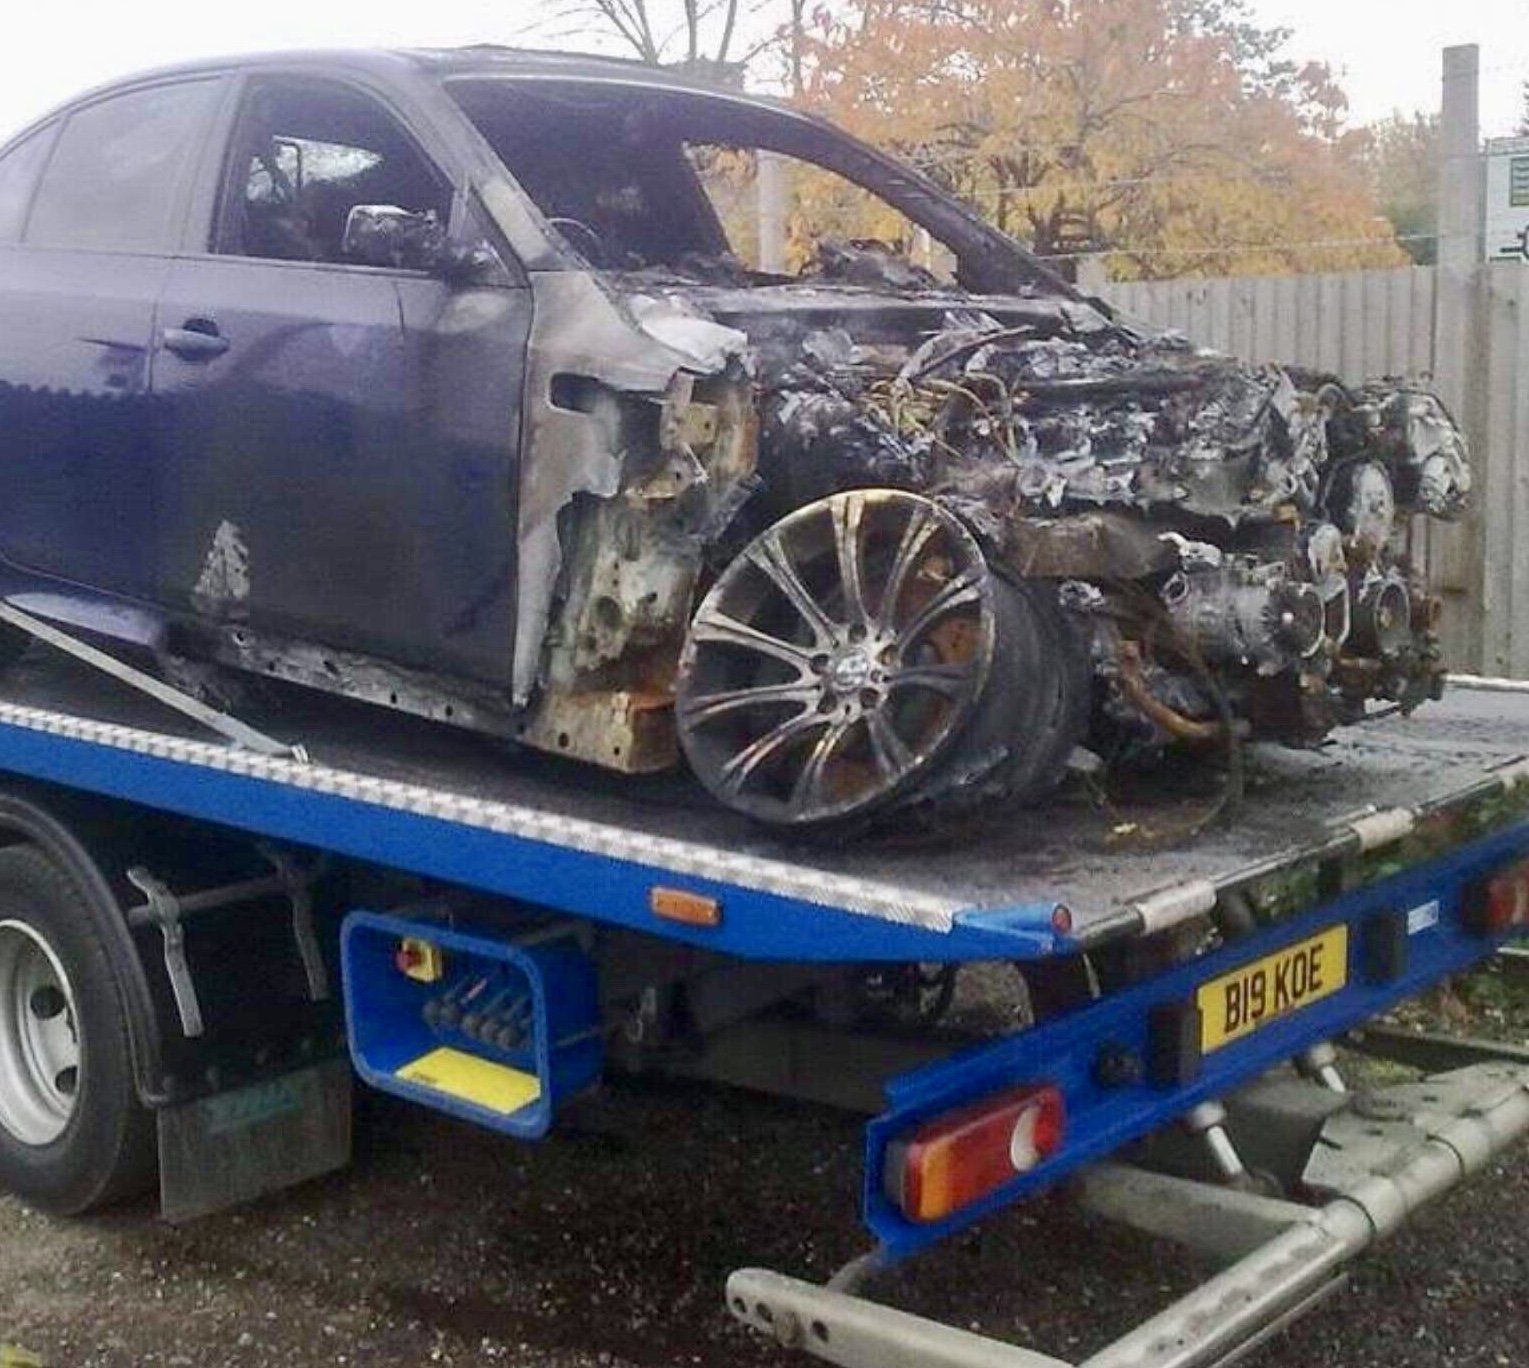 Accident recovery - Ellesmere Port - Blakoe Recovery Service - Vehicle Recovery